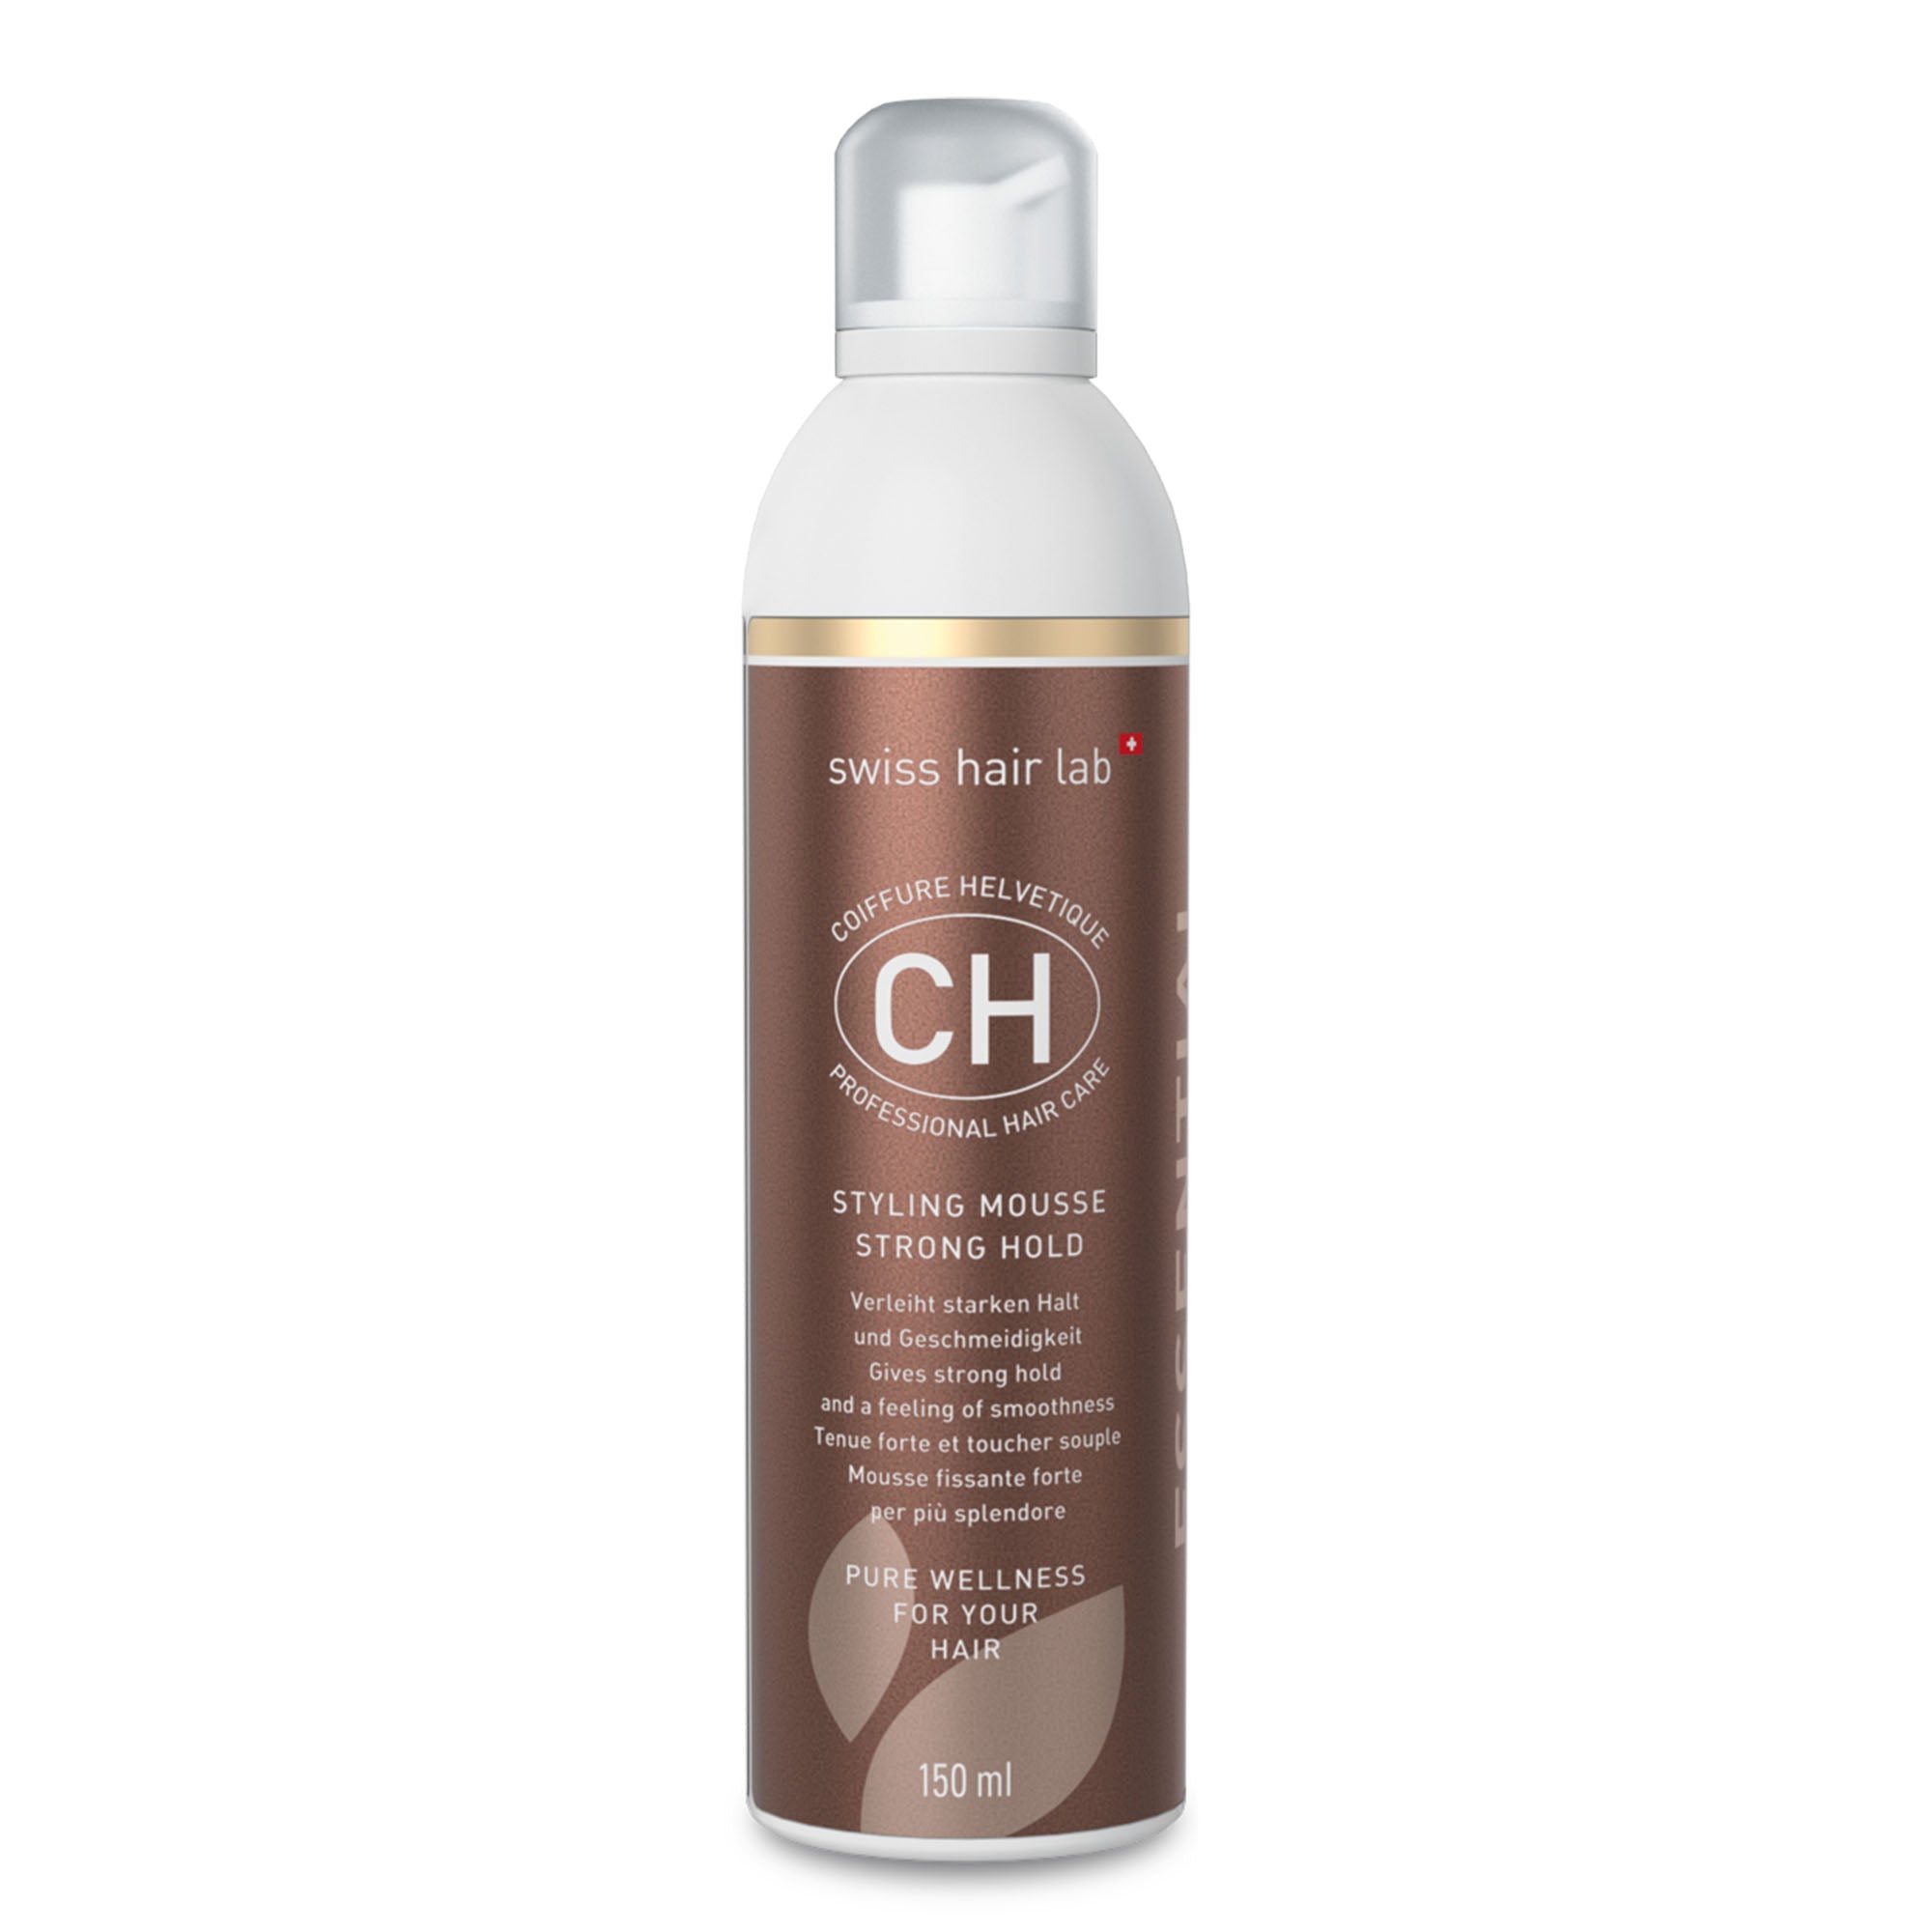 STYLING MOUSSE STRONG HOLD 150 ml